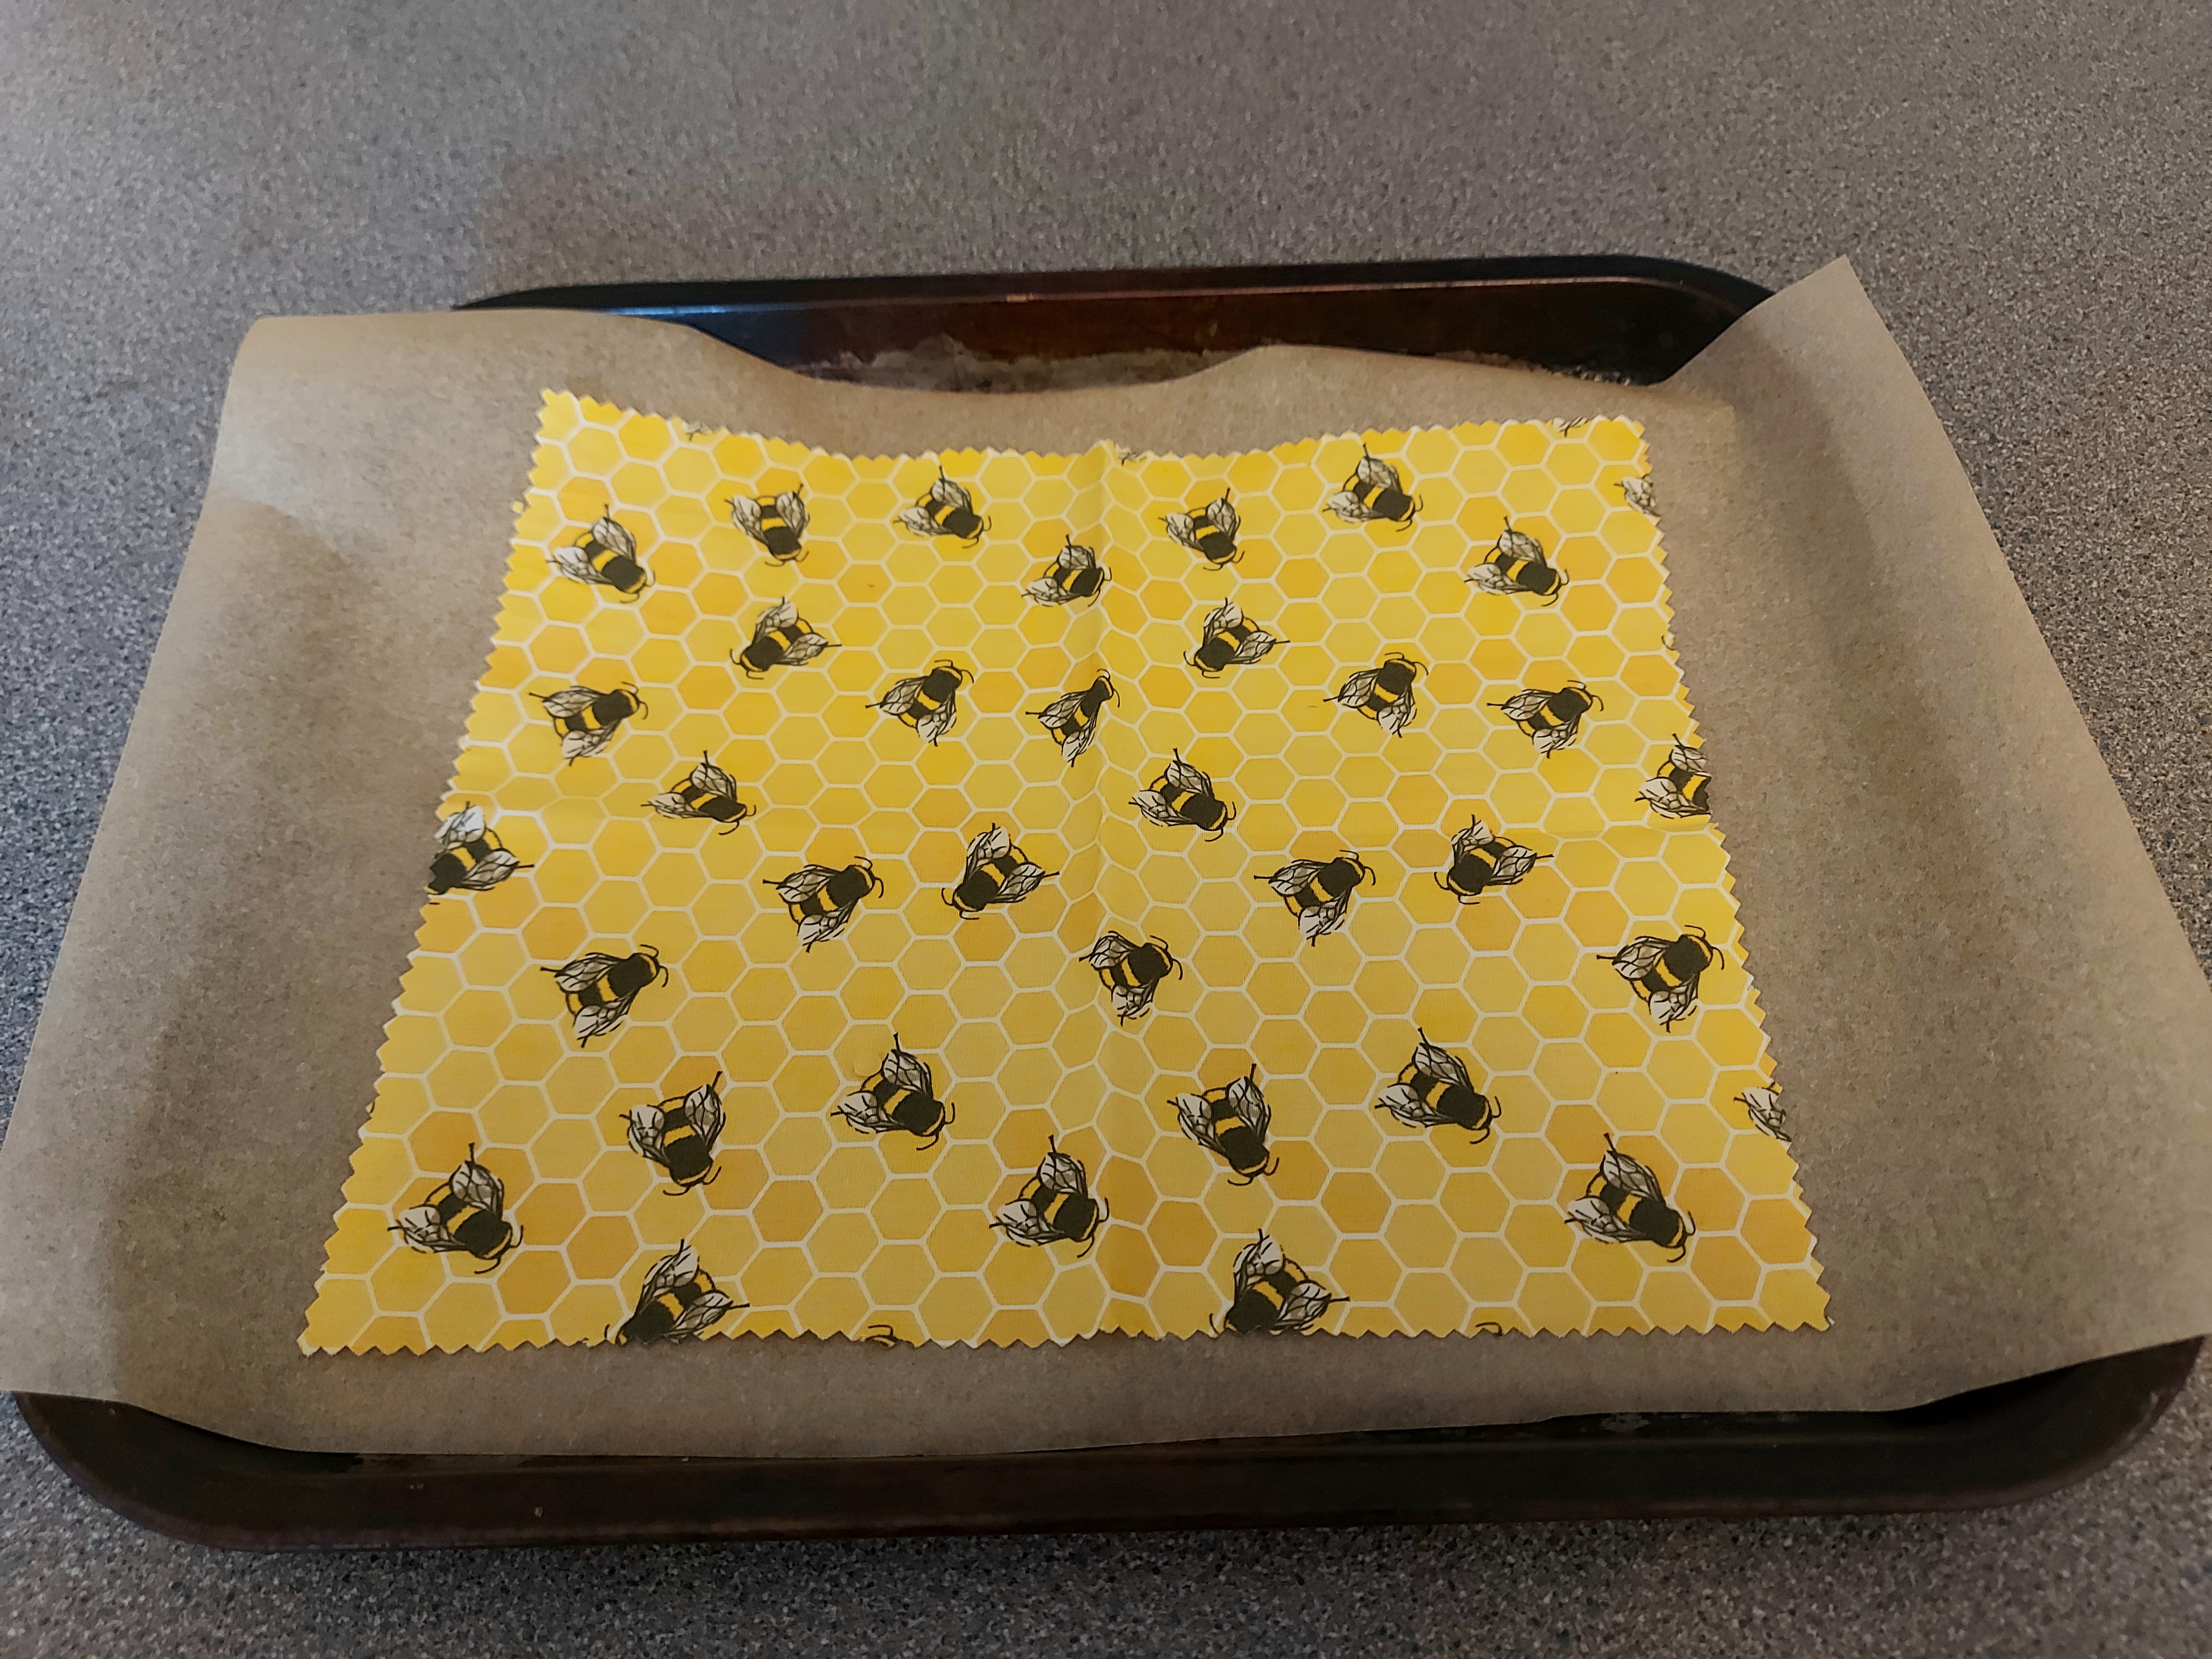 a yellow piece of fabric patterned with bees on a baking tray